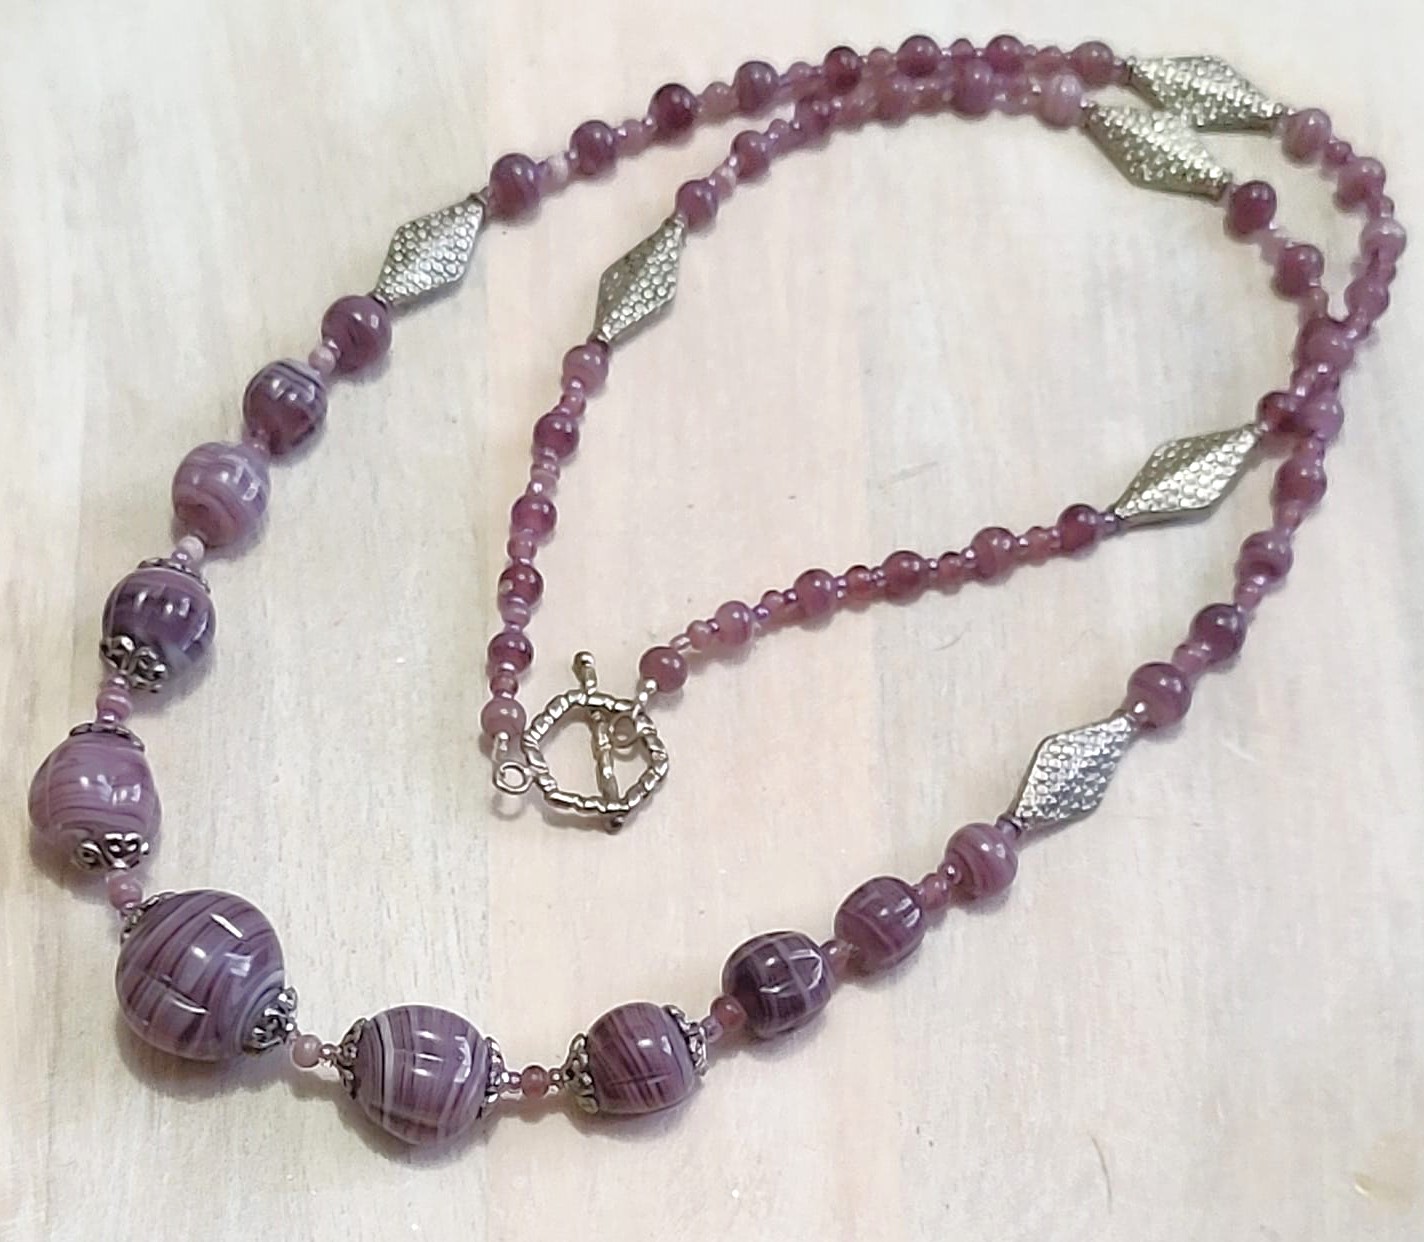 Purple swirl glass bead necklace with textured silver plated diamond shape accents, handcrafted necklace